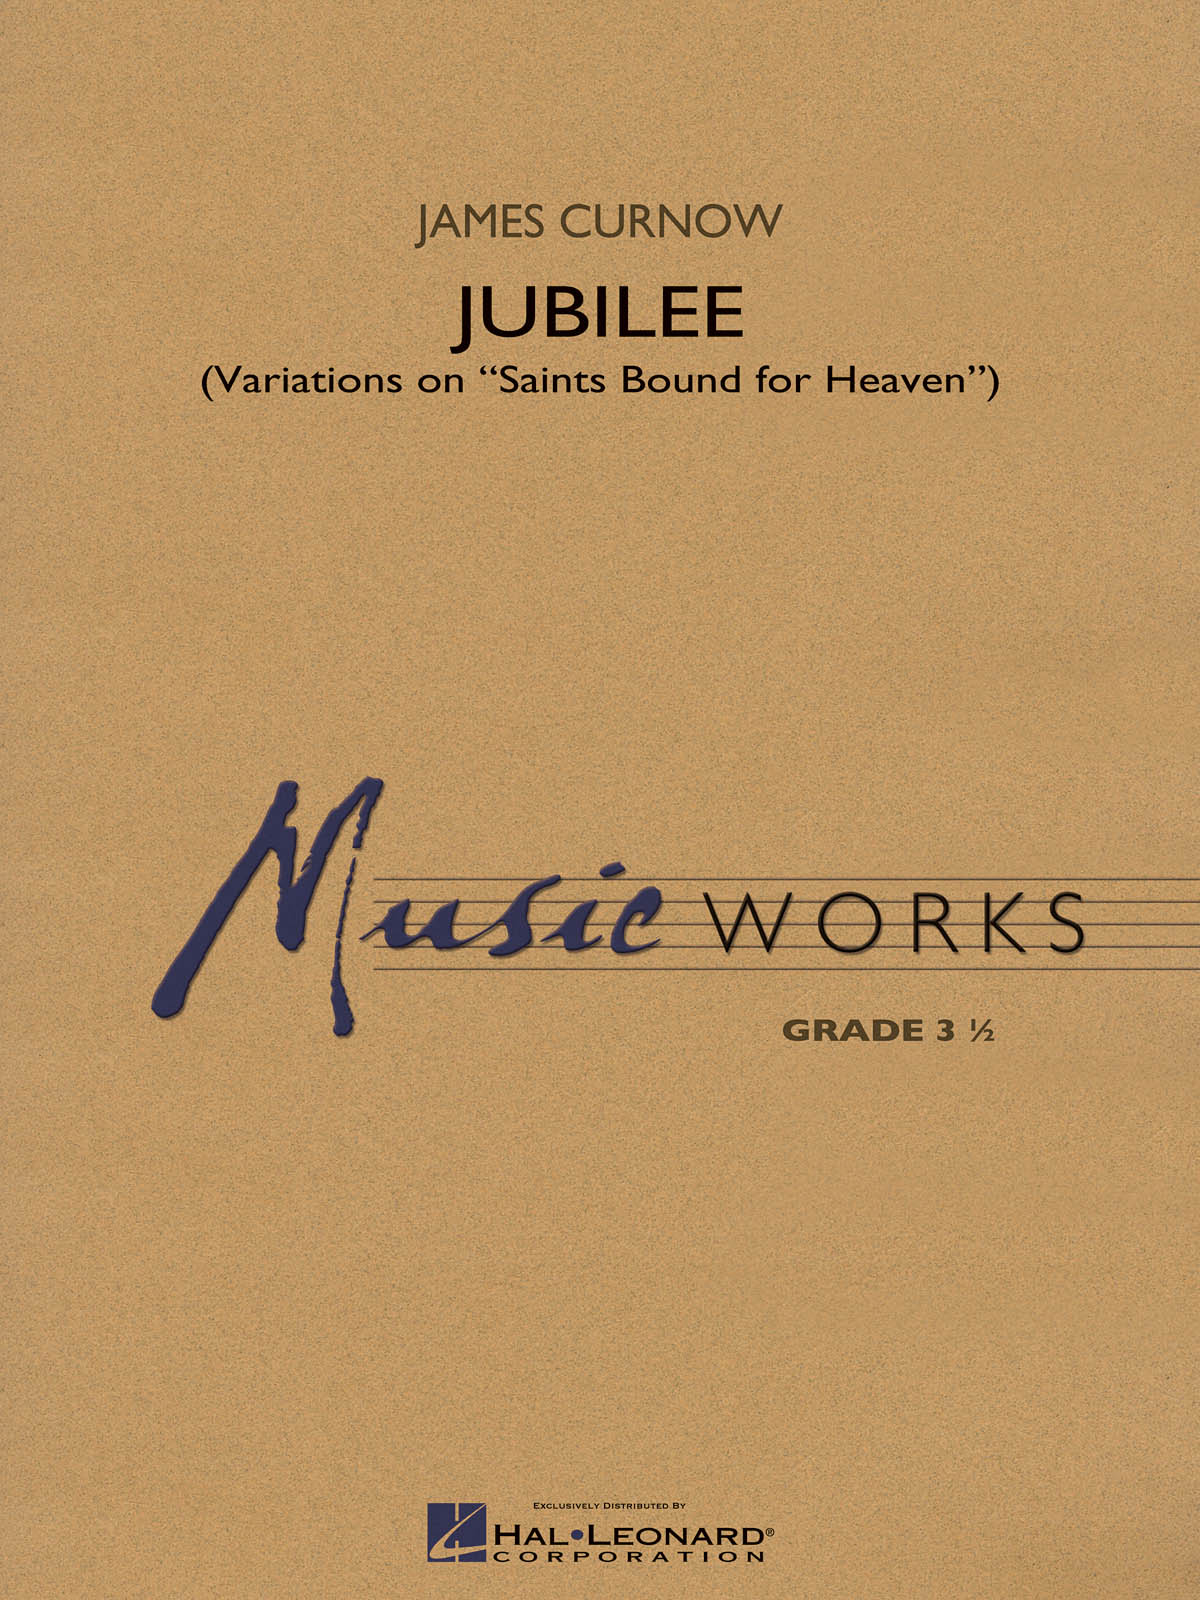 James Curnow: Jubilee: Concert Band: Score